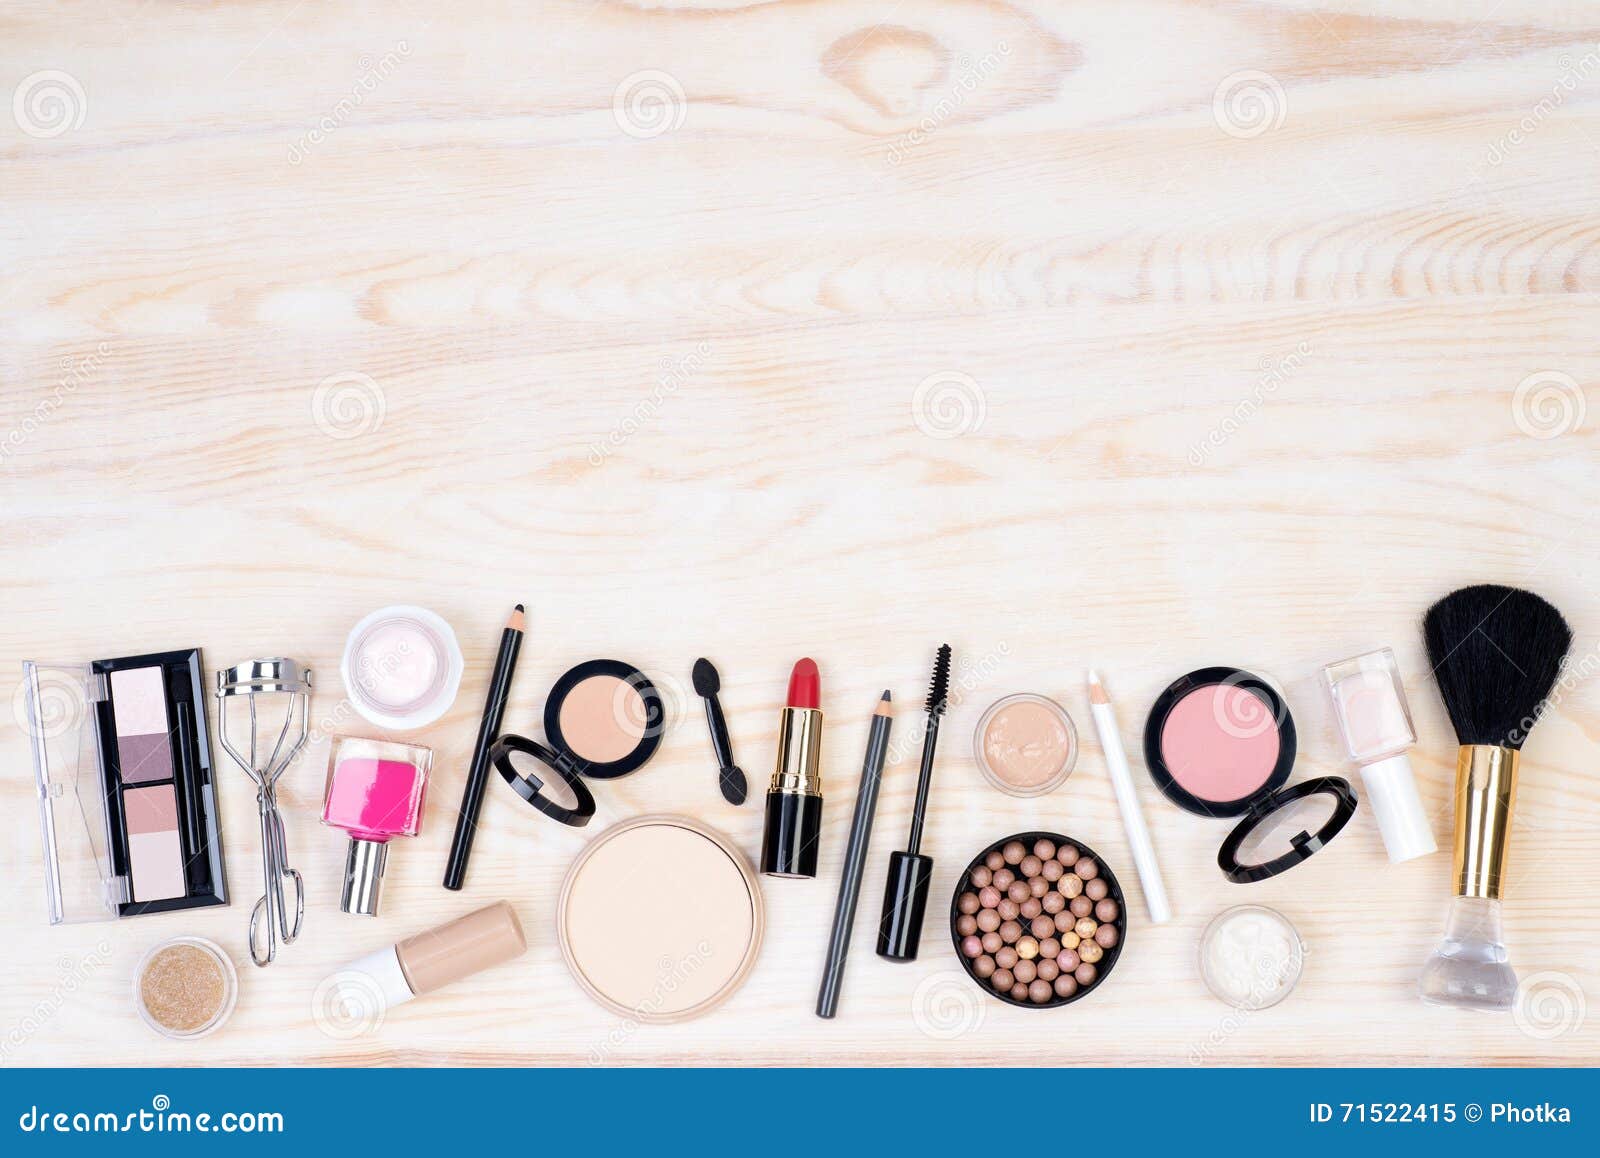 Makeup Cosmetics On White Wooden Background Stock Image Image Of